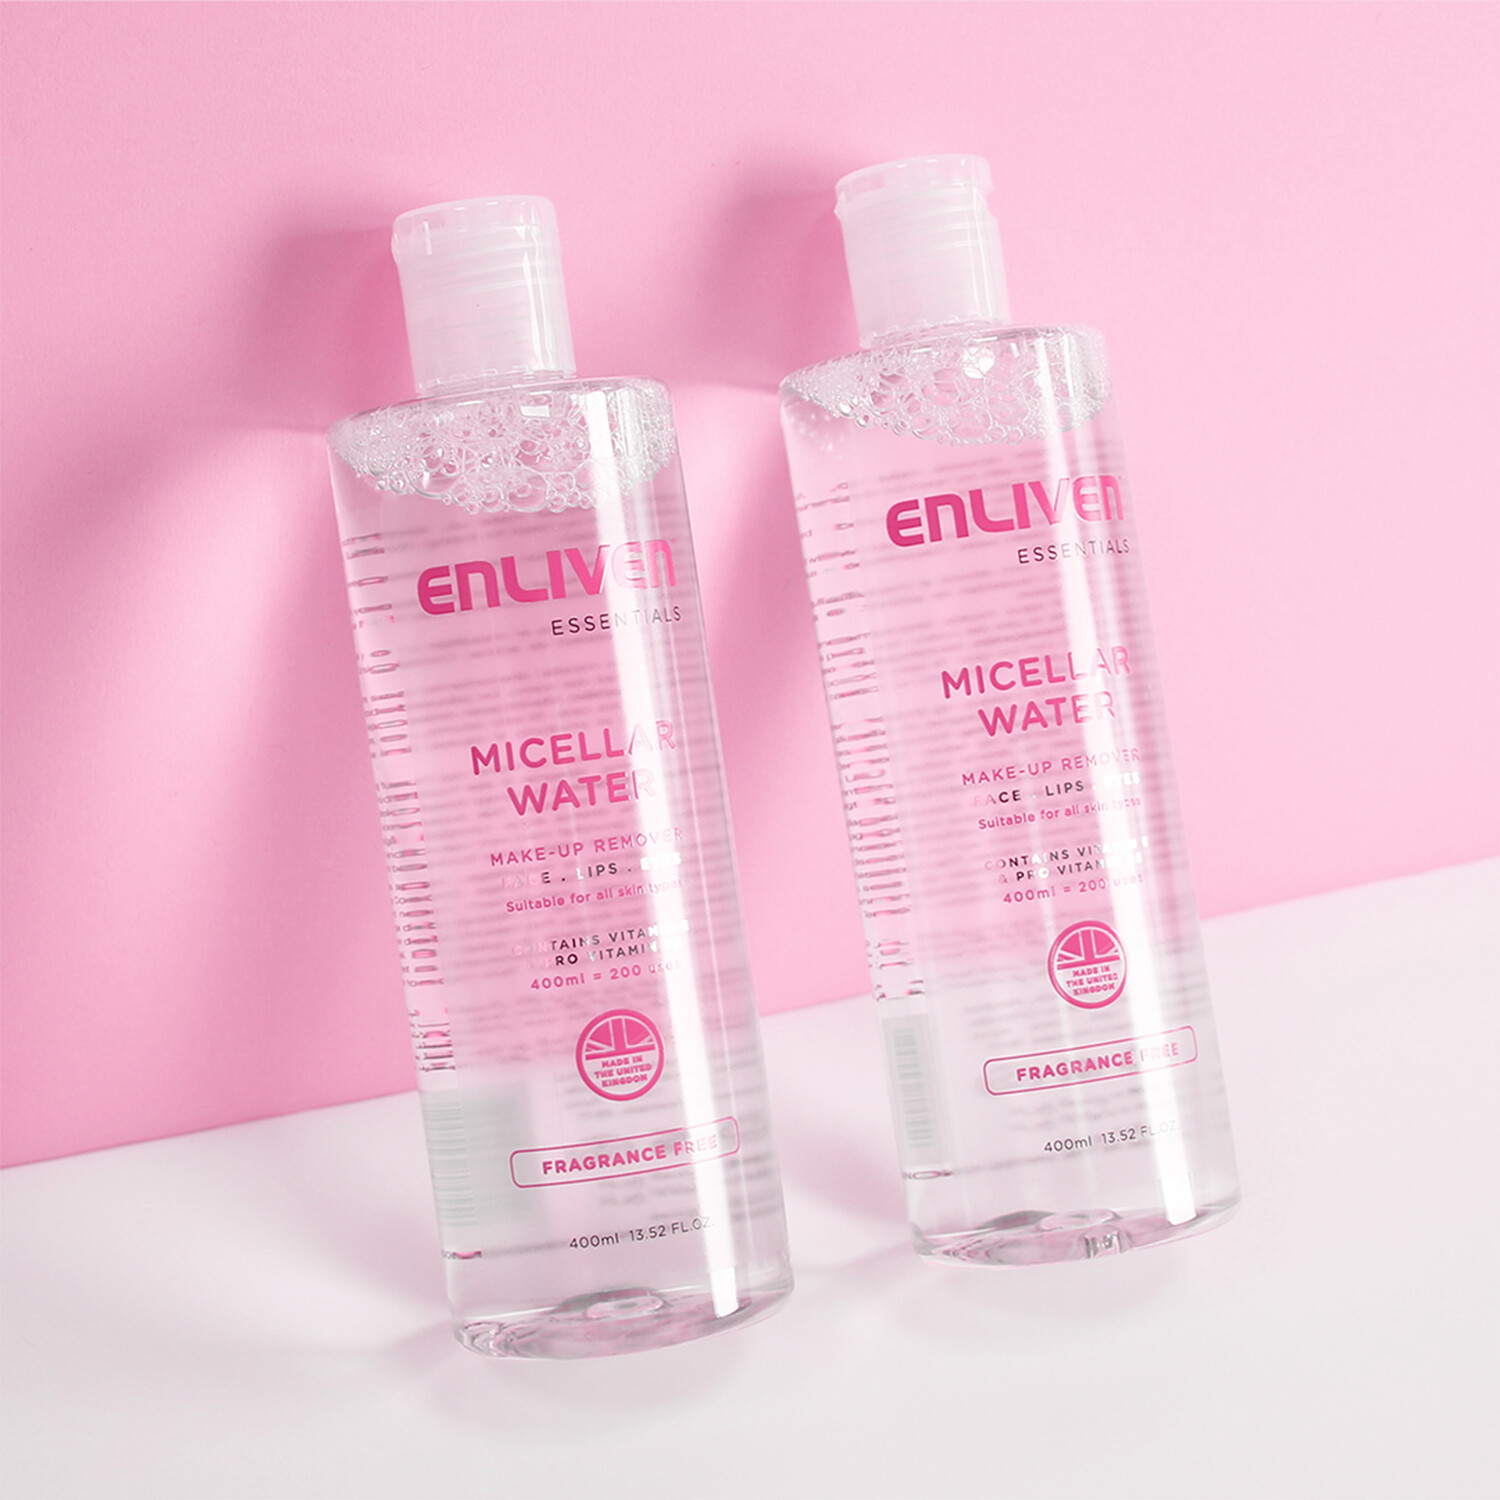 Enliven Micellar Water 400ml Image 2